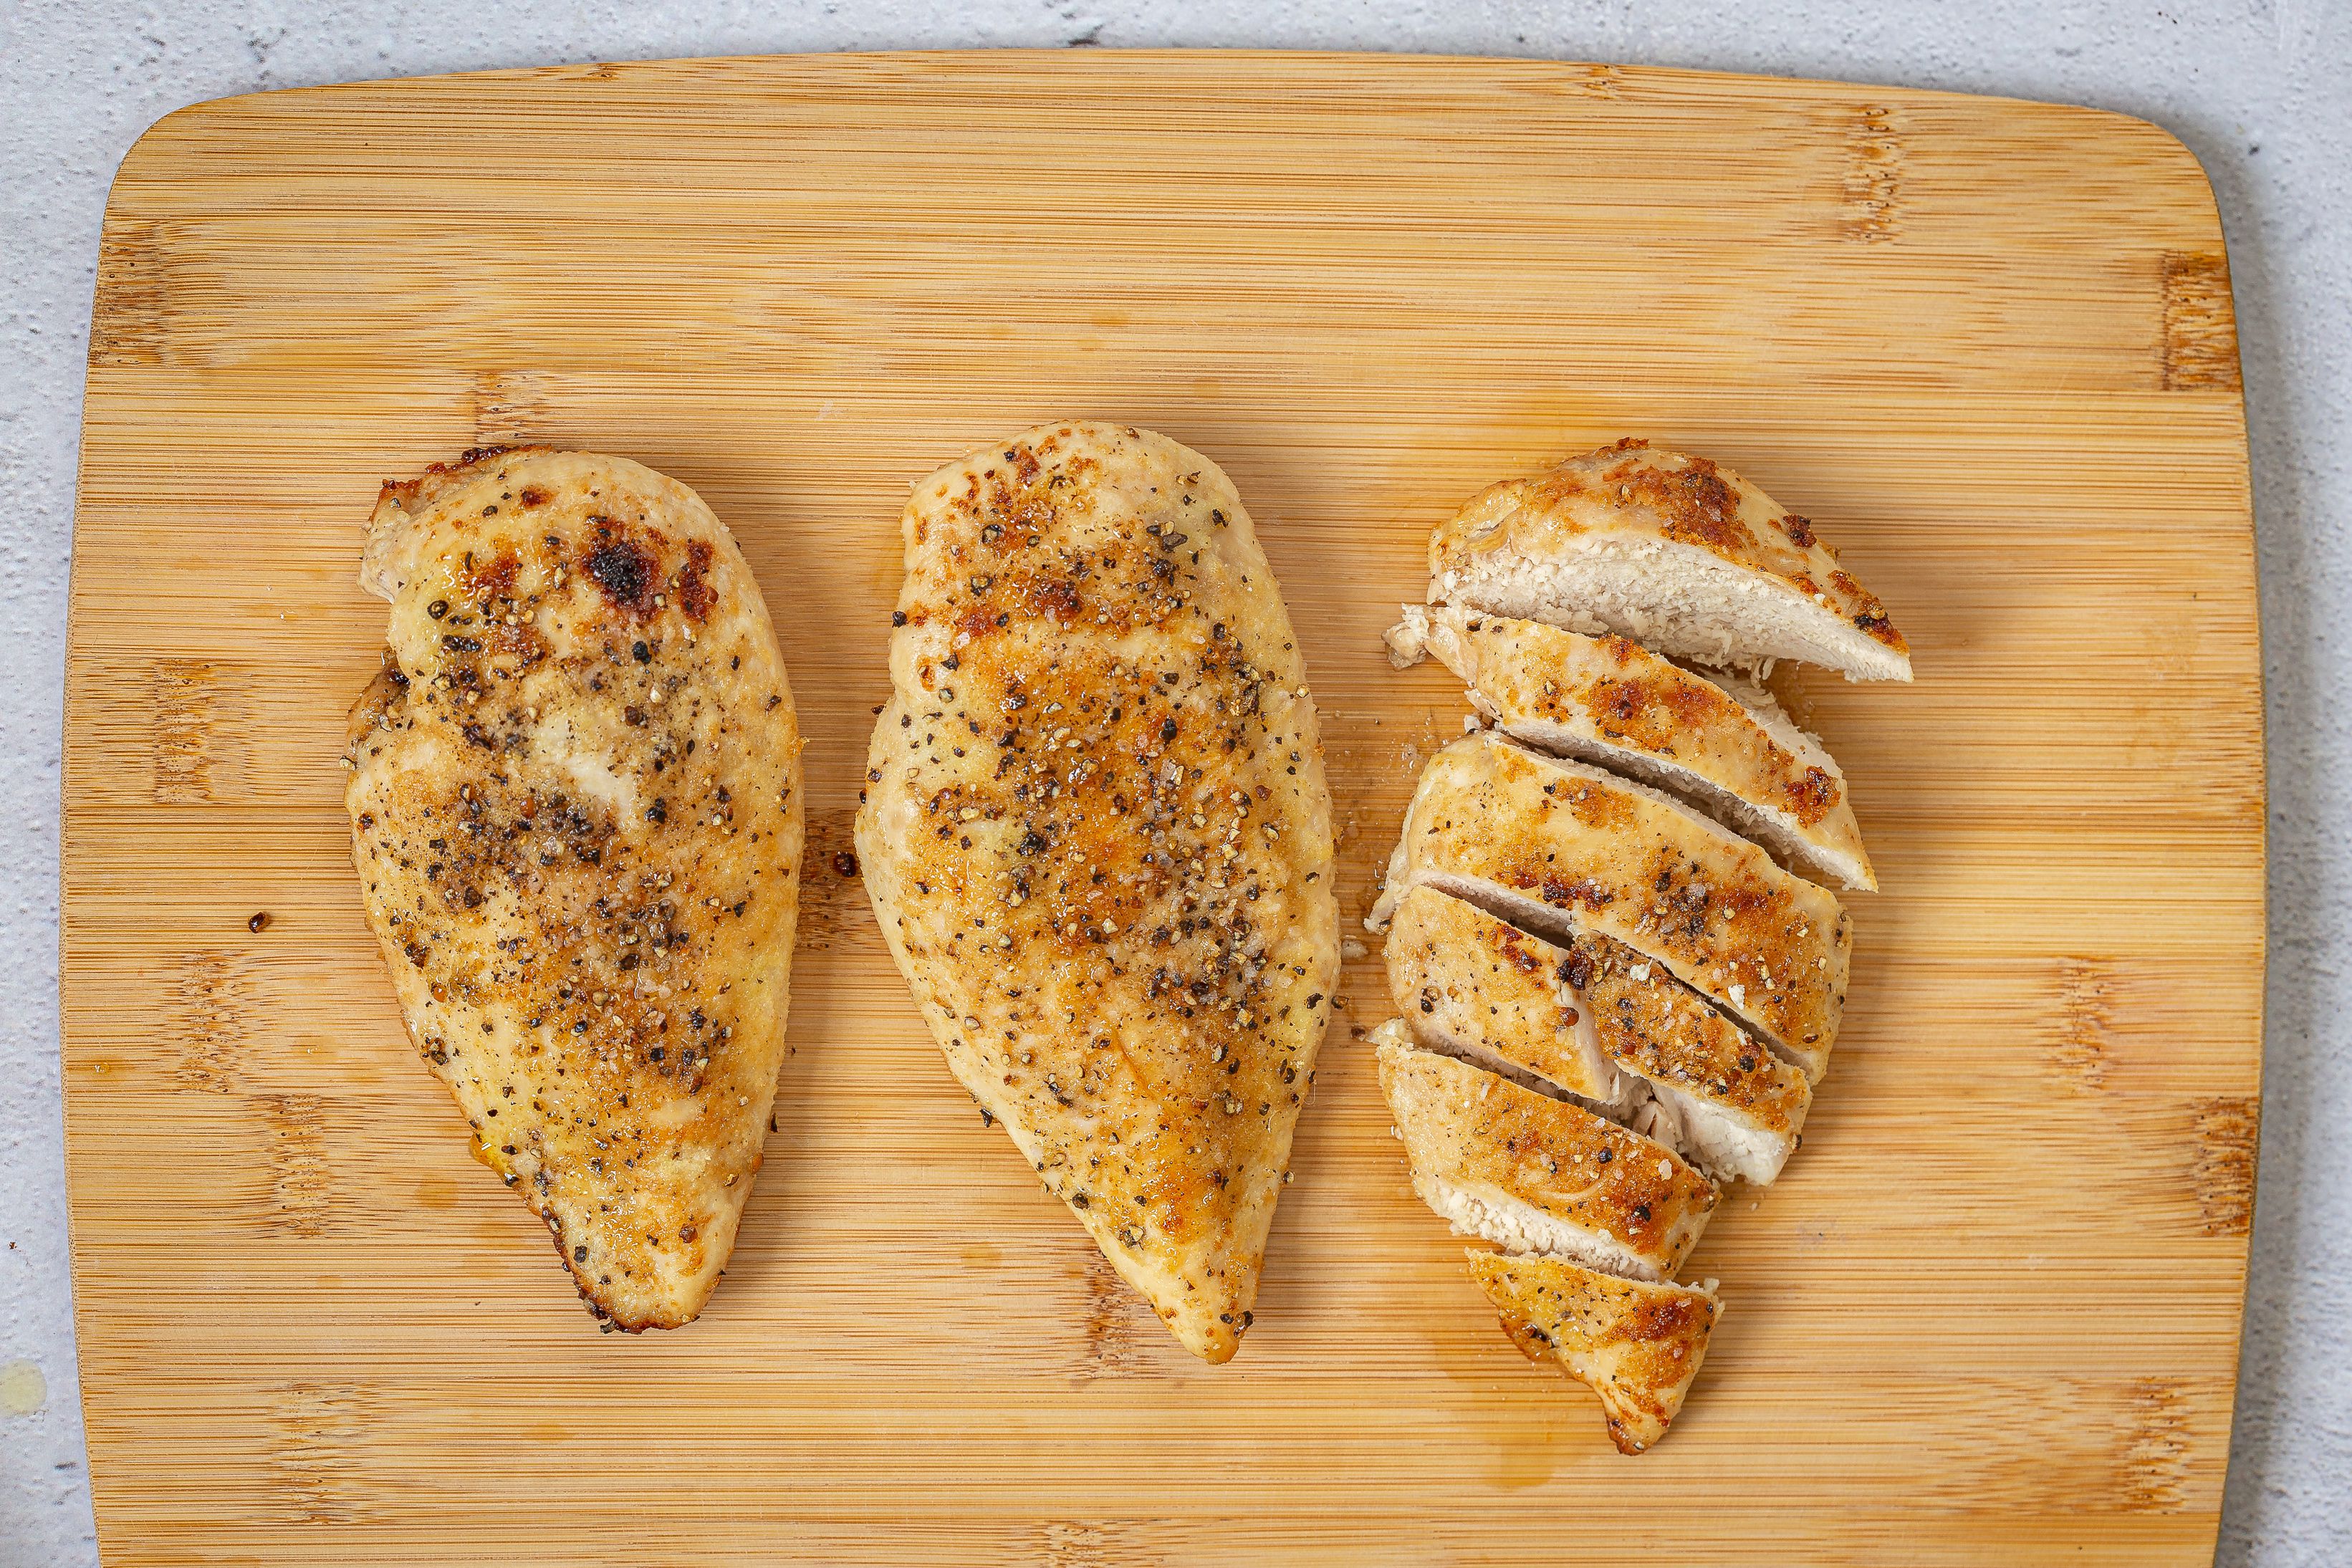 Basic Baked Chicken Breasts Recipe